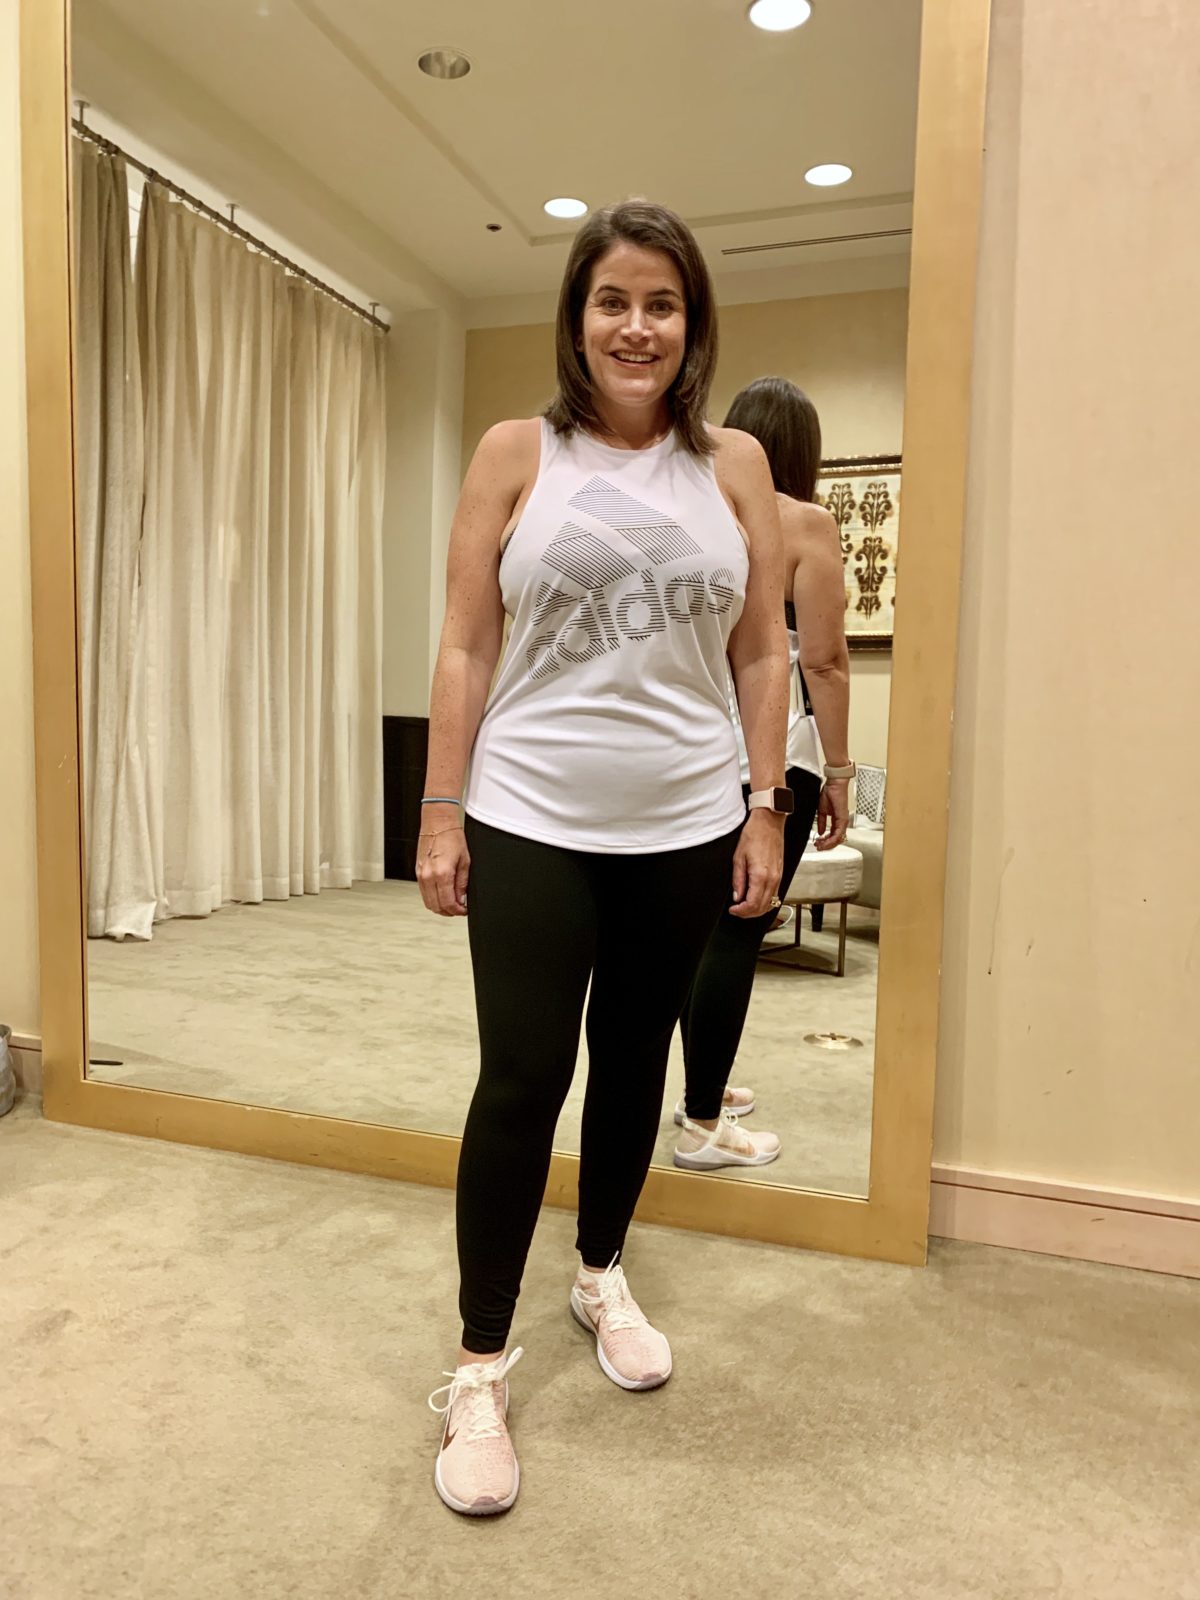 Nordstrom Anniversary Sale - Adidas Workout Tank with Nike 7/8 cut Leggings with adidas tennis shoes